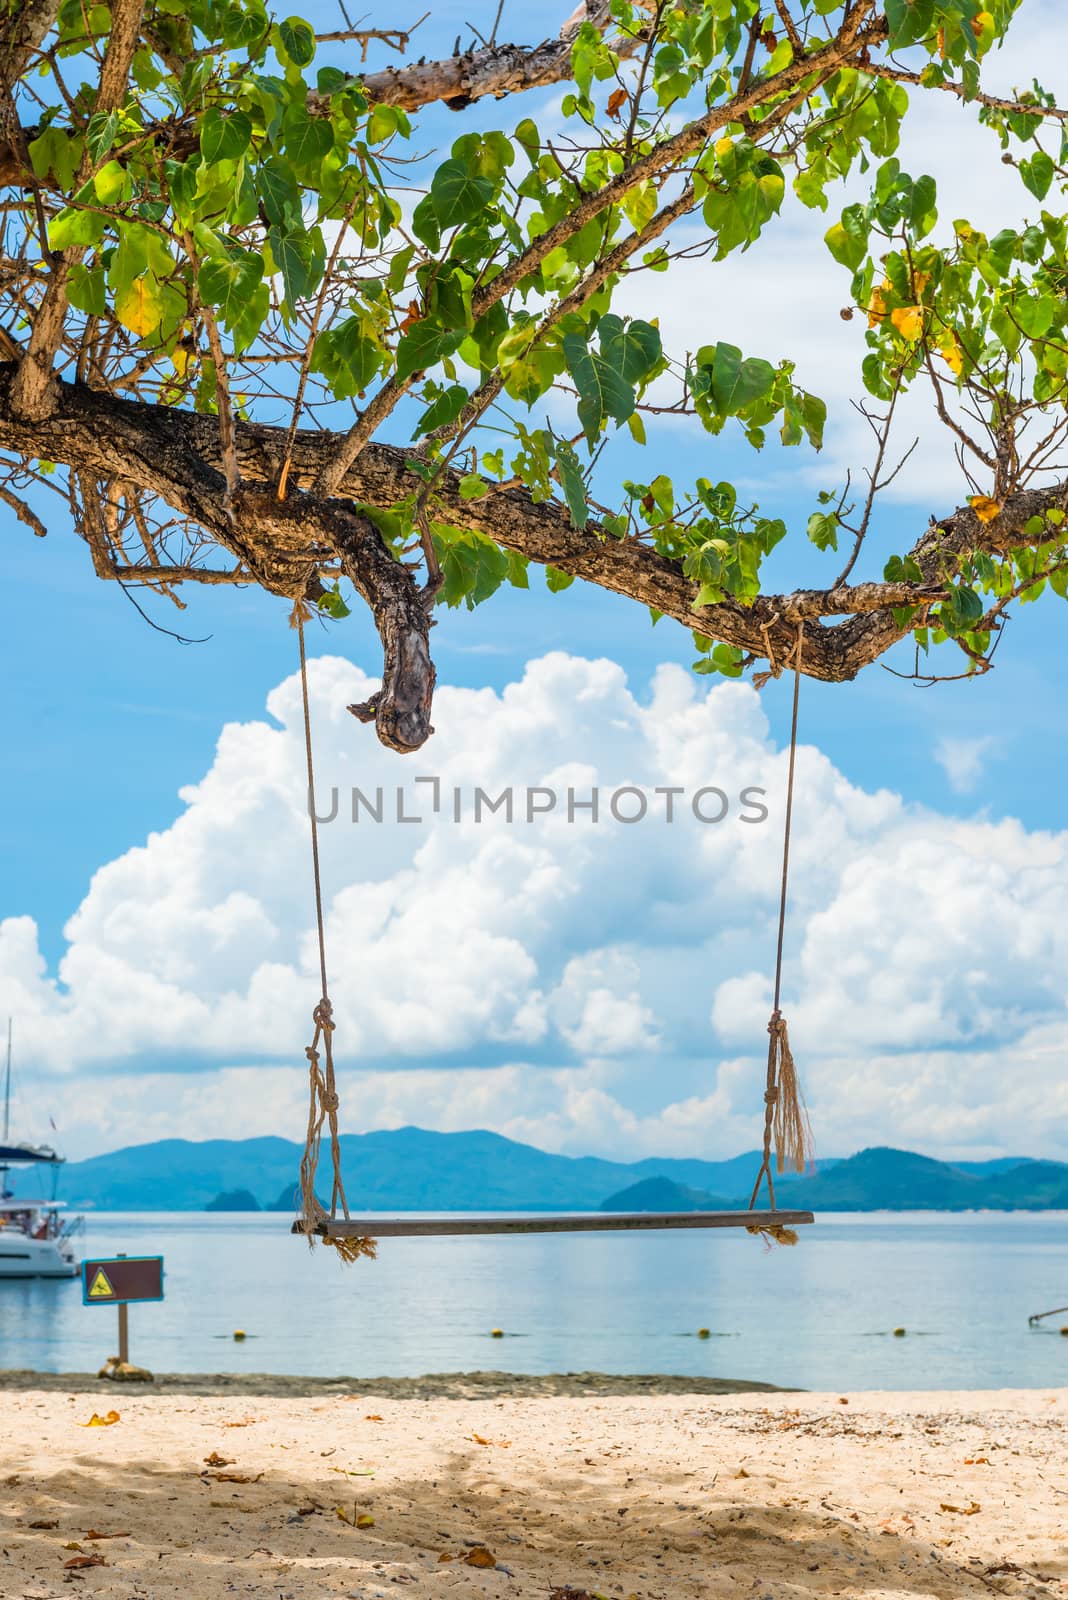 sea landscape with a swing in the foreground, a photo from Thail by kosmsos111